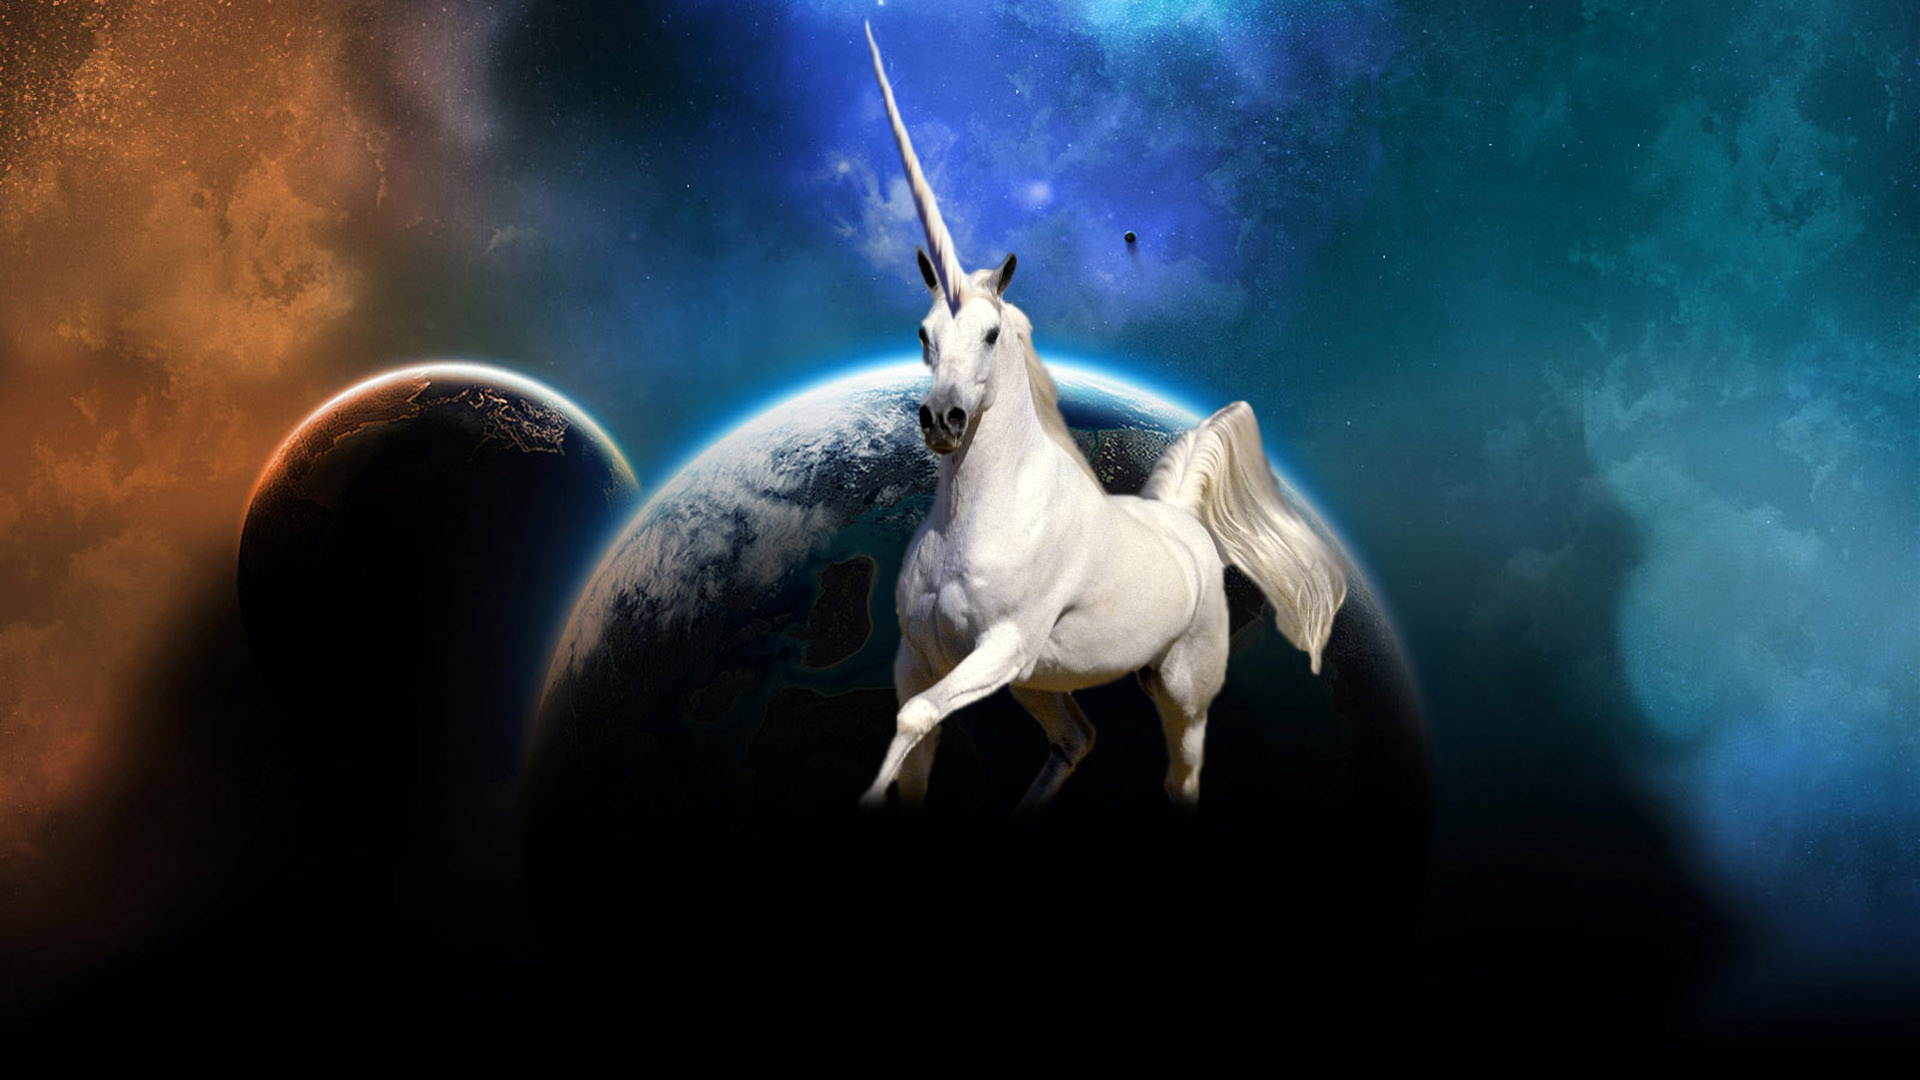 unicorn, Horse, Magical, Animal, Planet, Space, Psychedelic Wallpaper